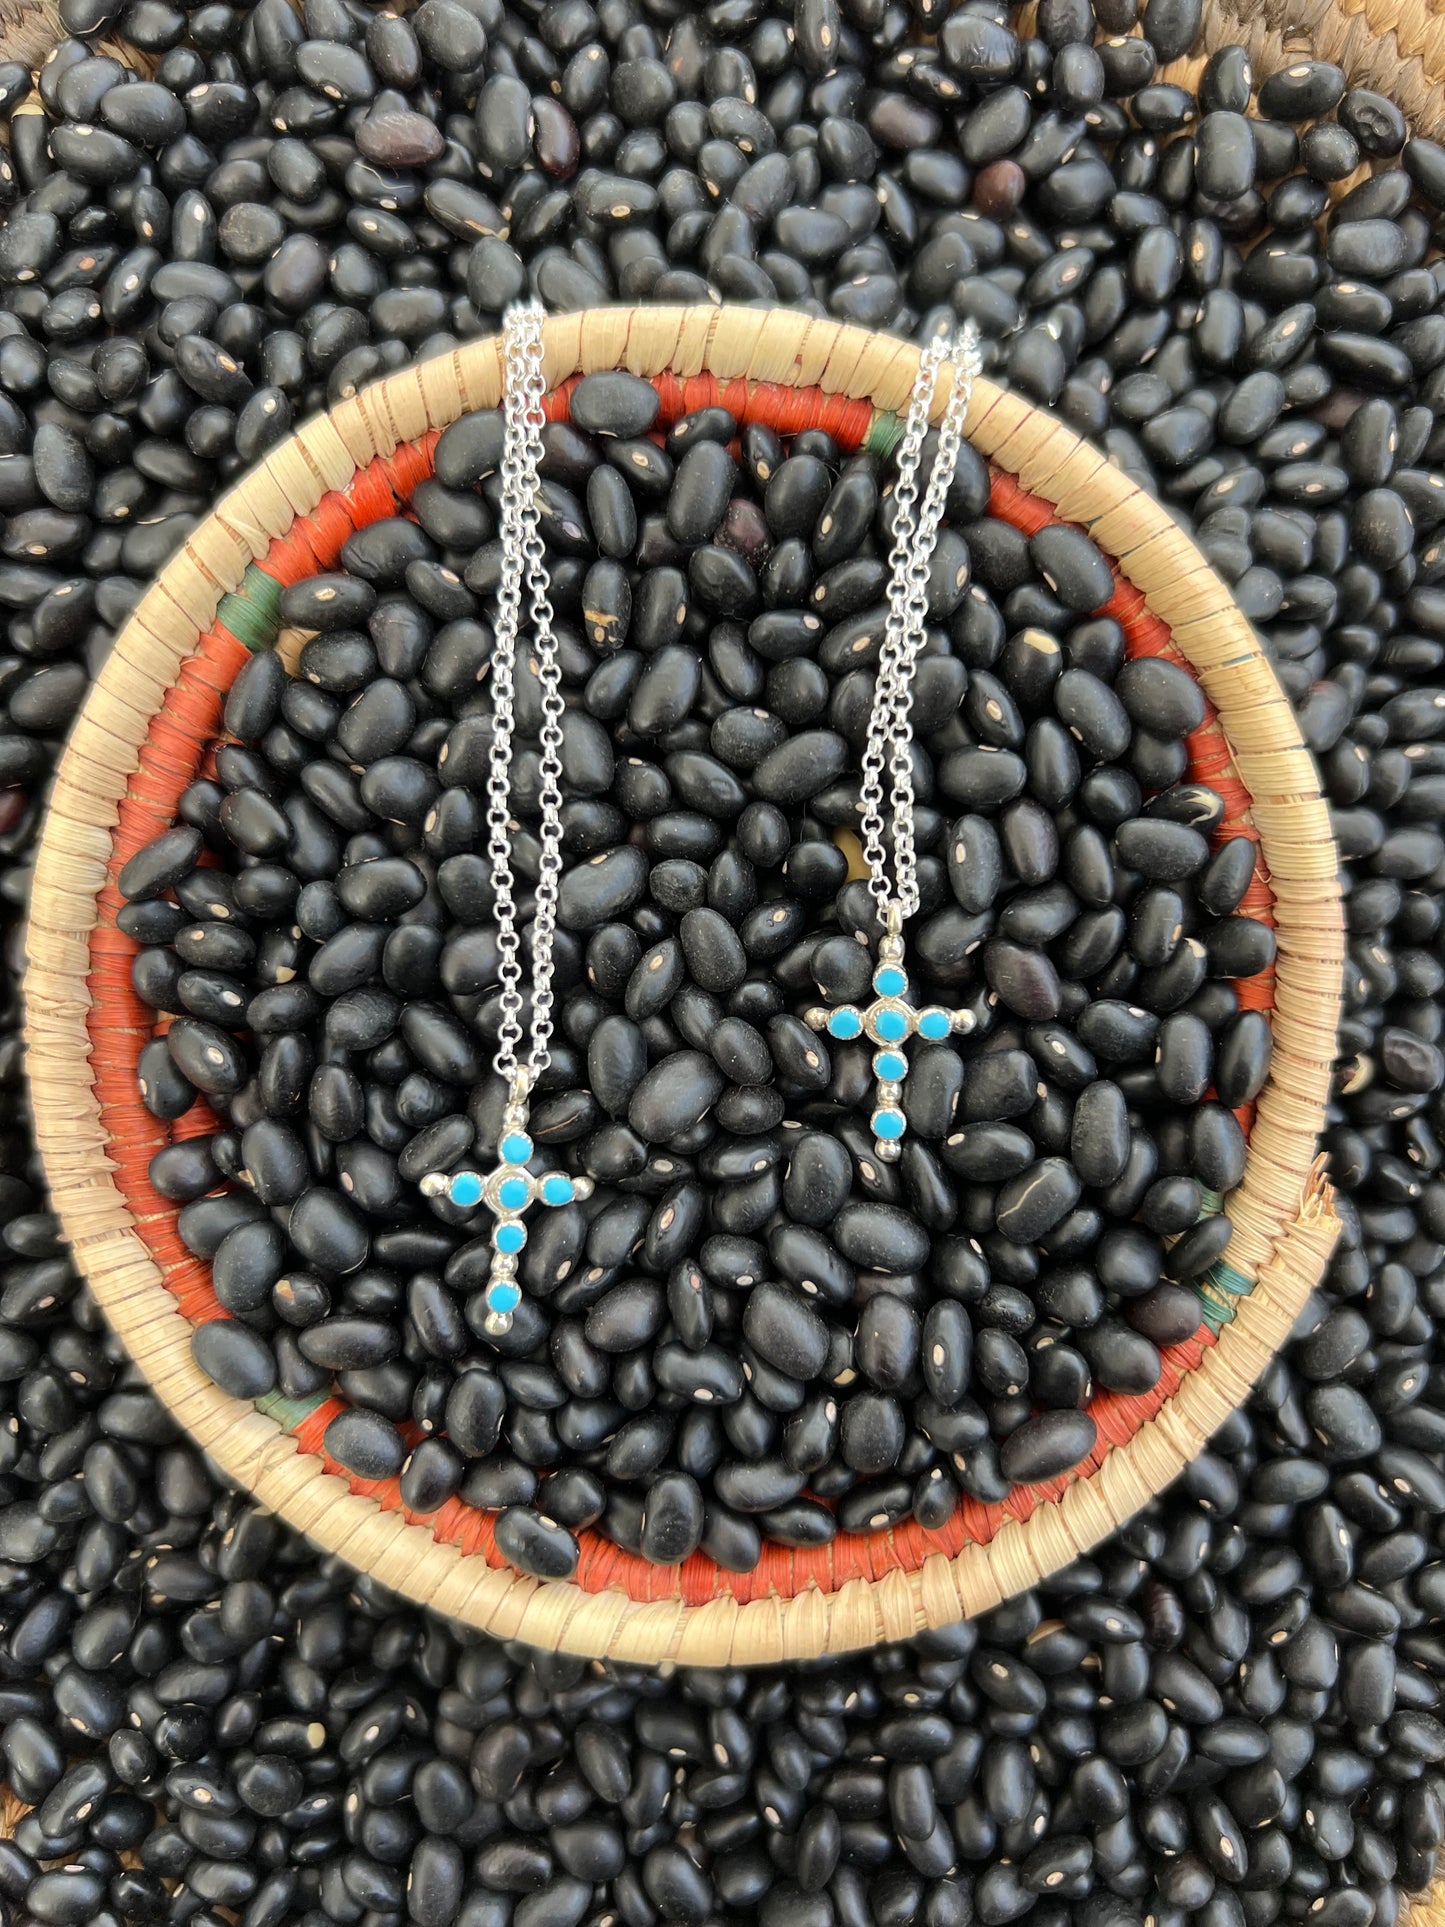 Turquoise Cross Necklace